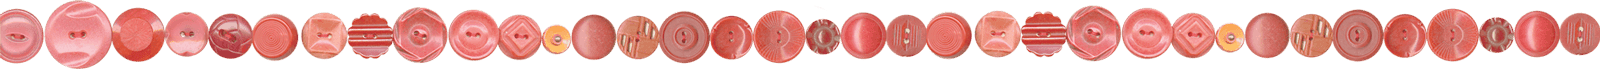 Small Red Buttons